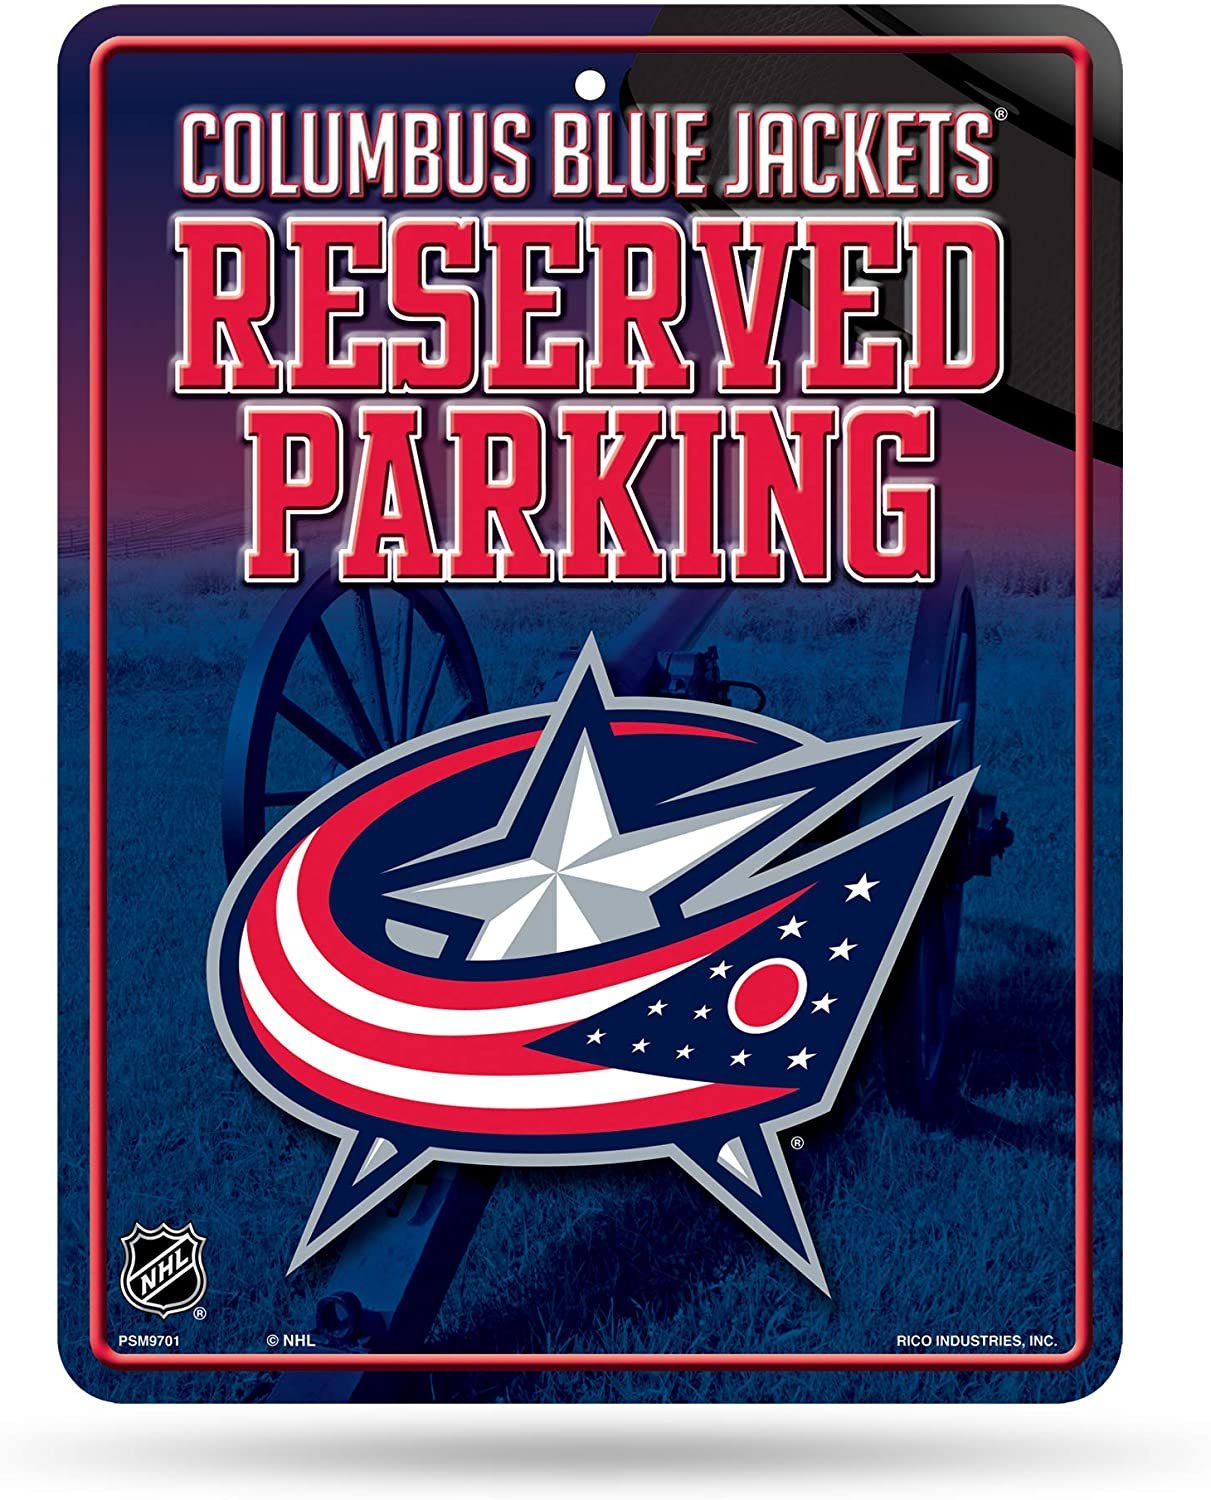 Columbus Blue Jackets 8-Inch by 11-Inch Metal Parking Sign Décor